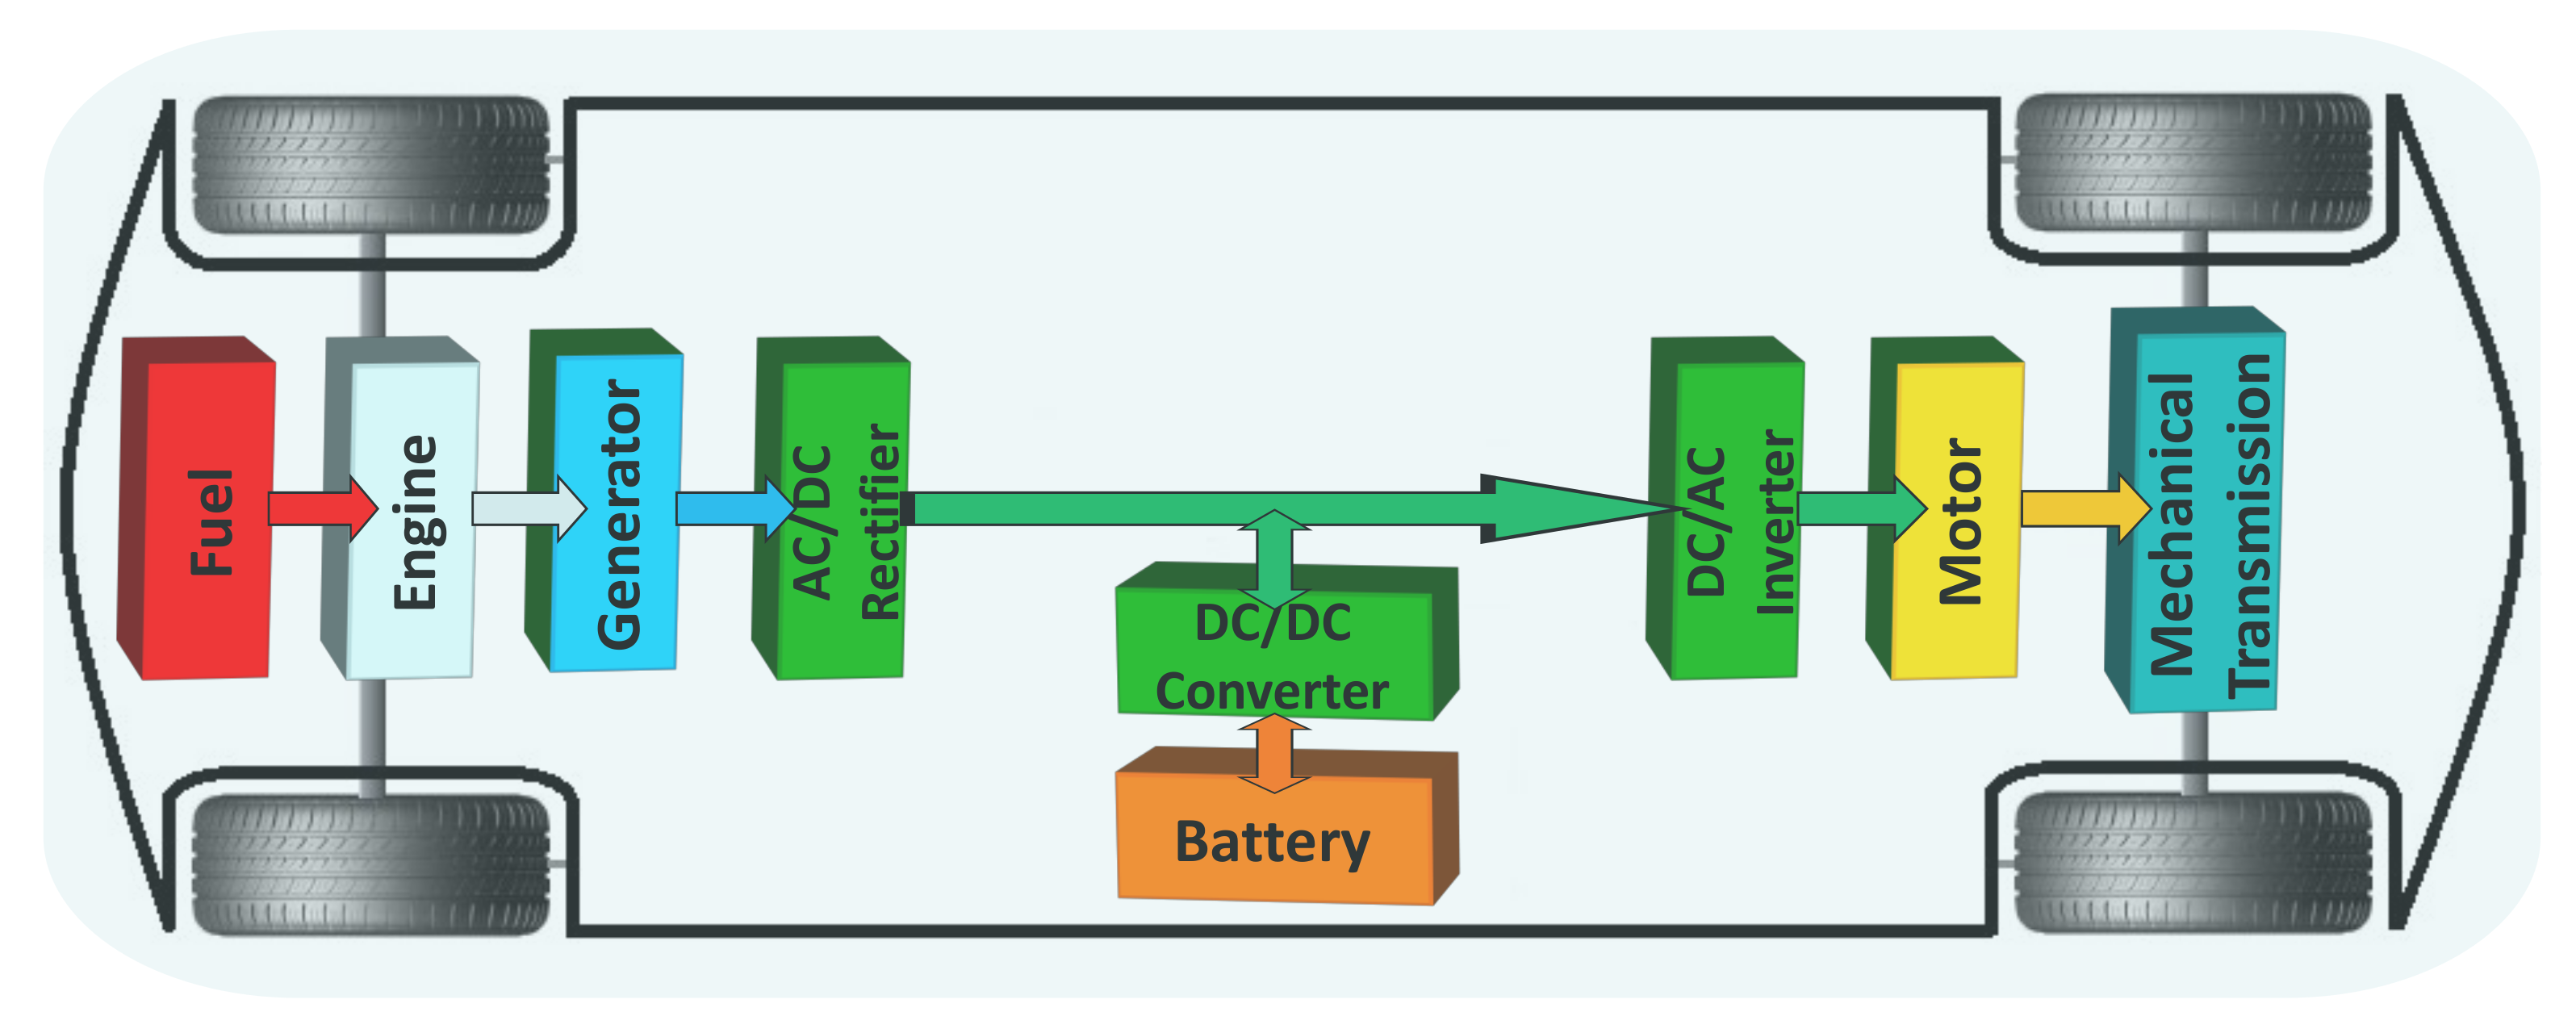 Energies | Free Full-Text A Review of DC-AC Converters Electric Vehicle Applications